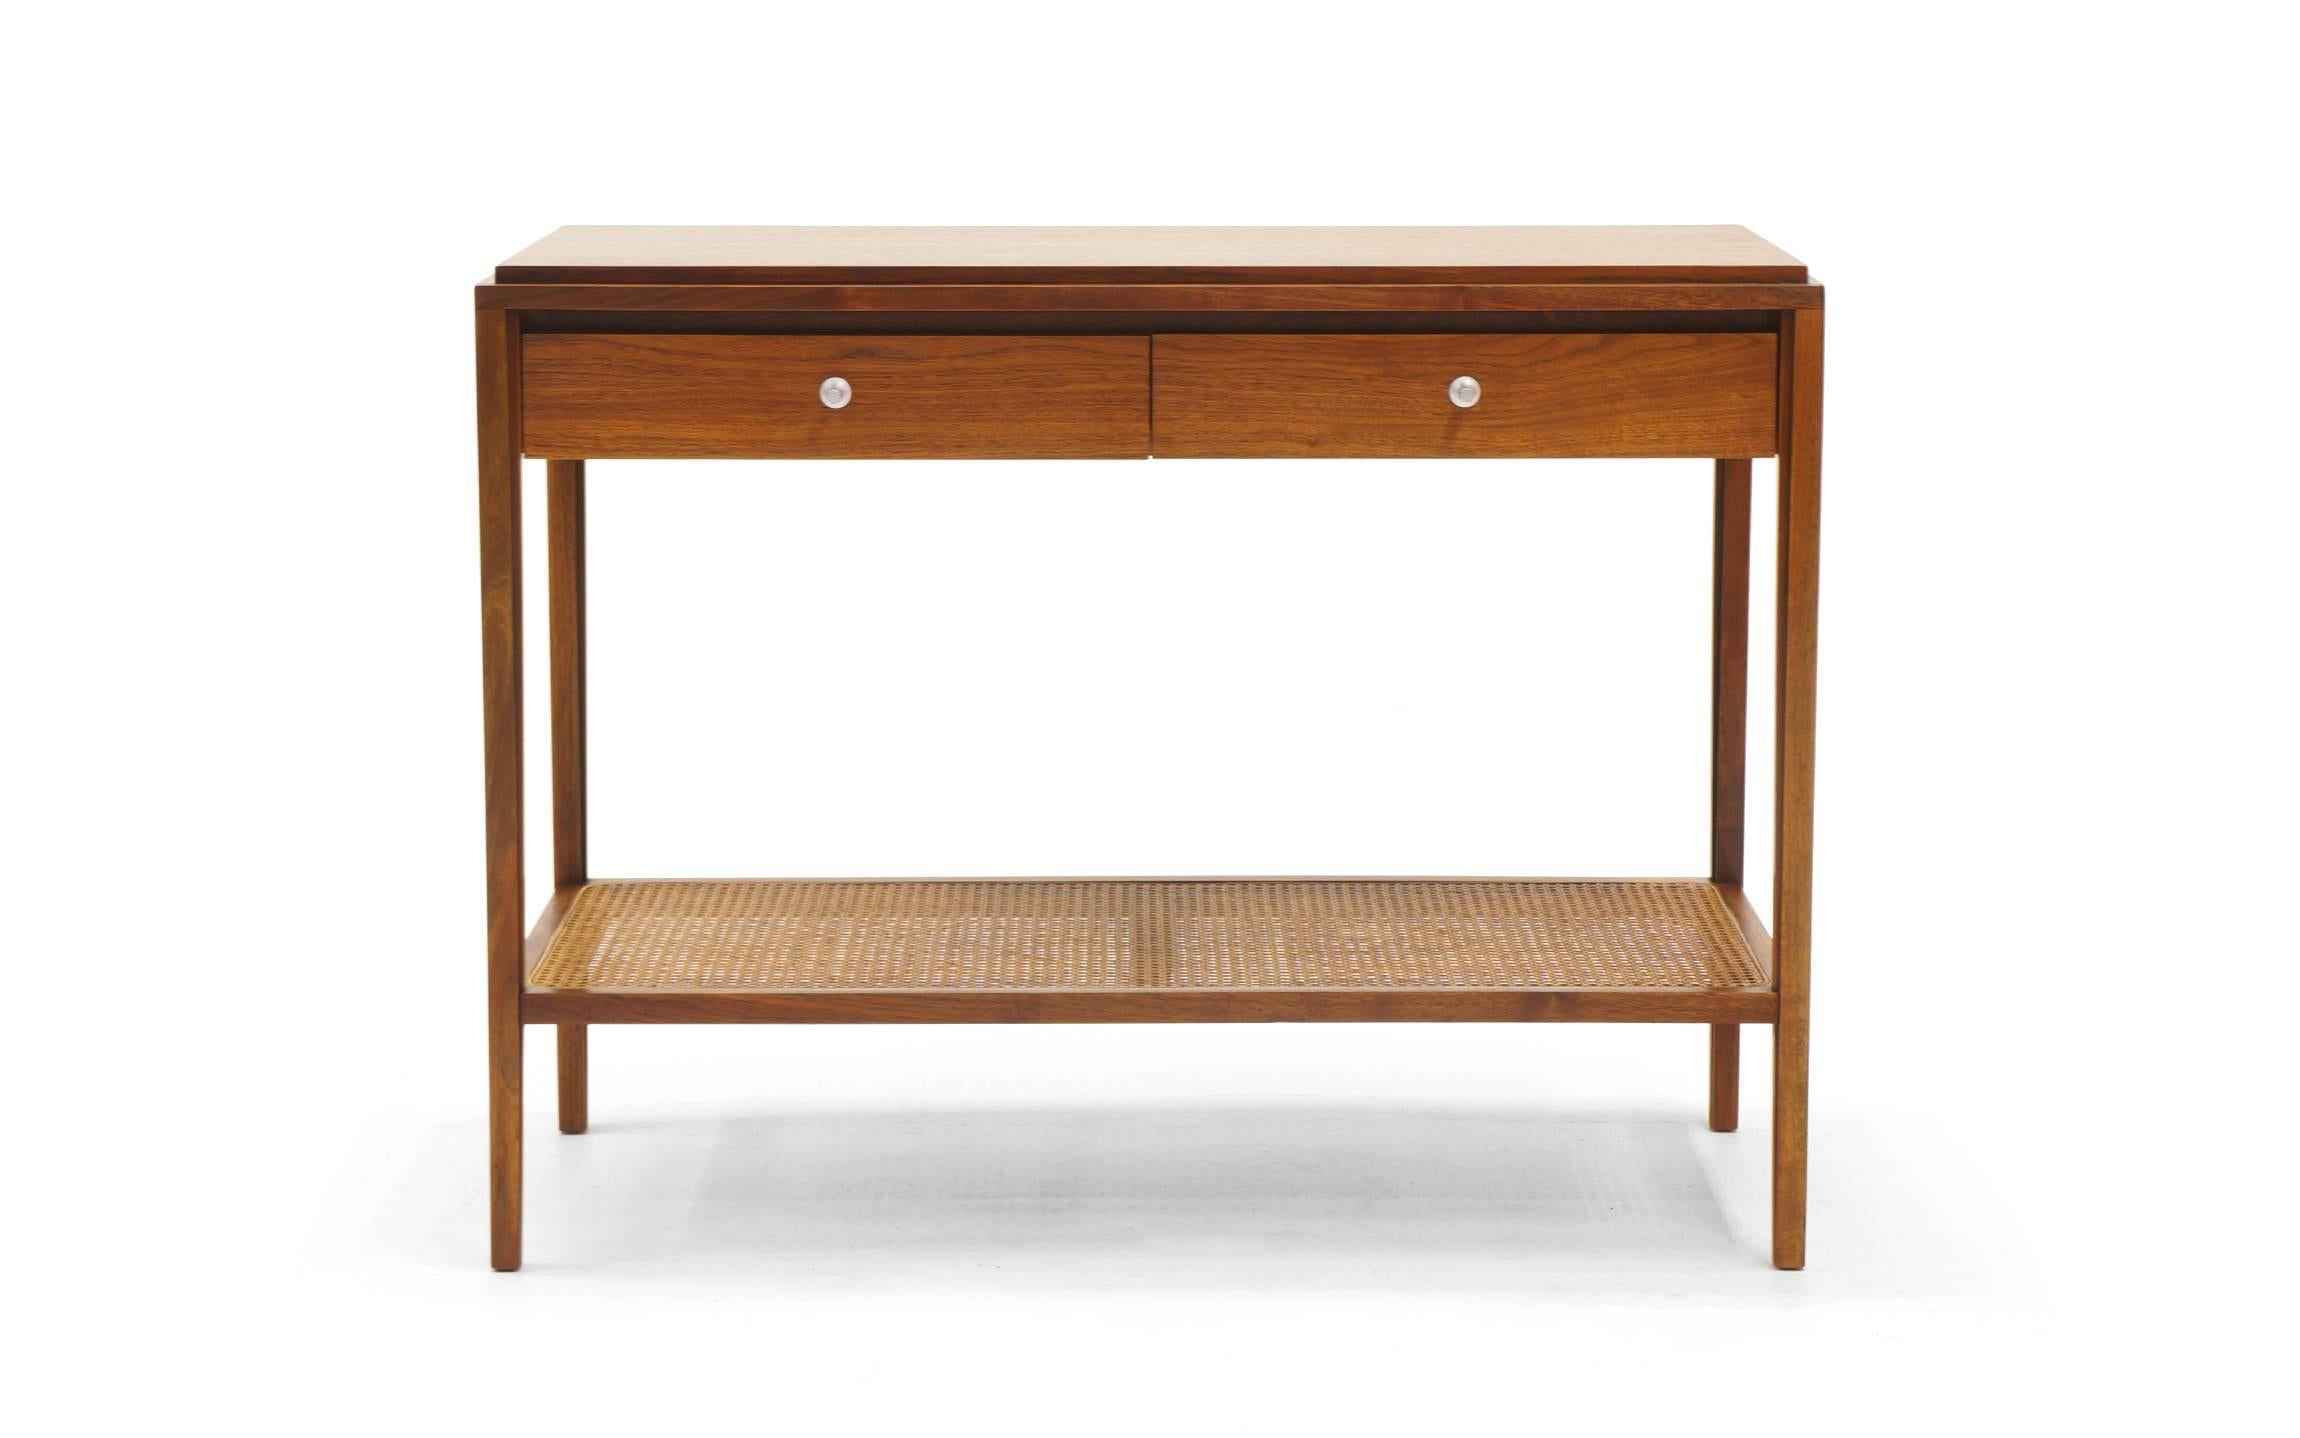 Console designed by Paul McCobb for the Grand Rapids collection in walnut and cane featuring two drawers. Signed with applied fabric manufacturer's mark to drawer: [Widdicomb Grand Rapids].